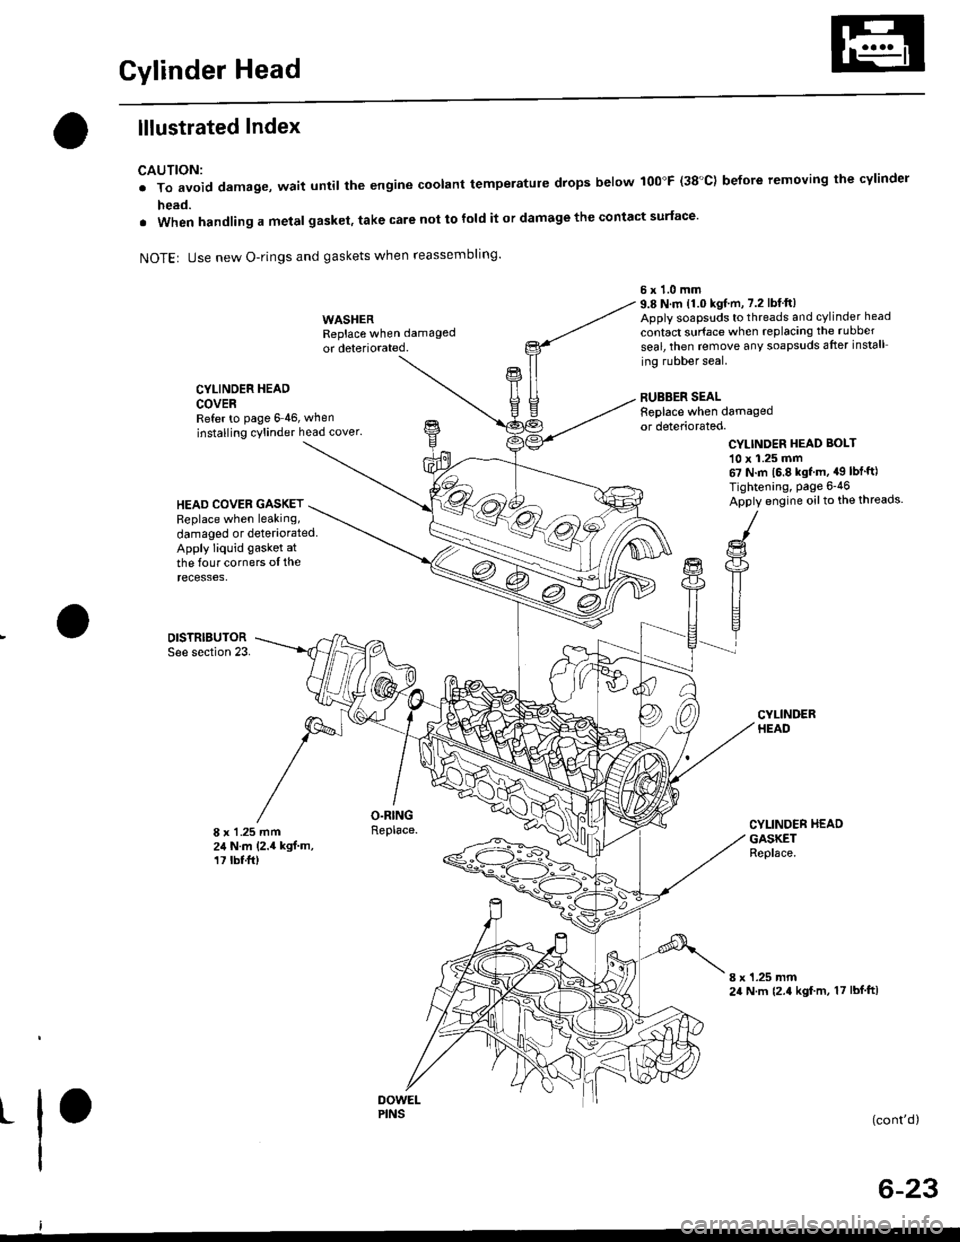 HONDA CIVIC 2000 6.G Workshop Manual Gylinder Head
lllustrated Index
CAUTION:
. To avoid damage, wait until the engine coolant temperatule drops below 100"F (38C) before removing the cylinder
head.
. When handling a metal gasket, take c